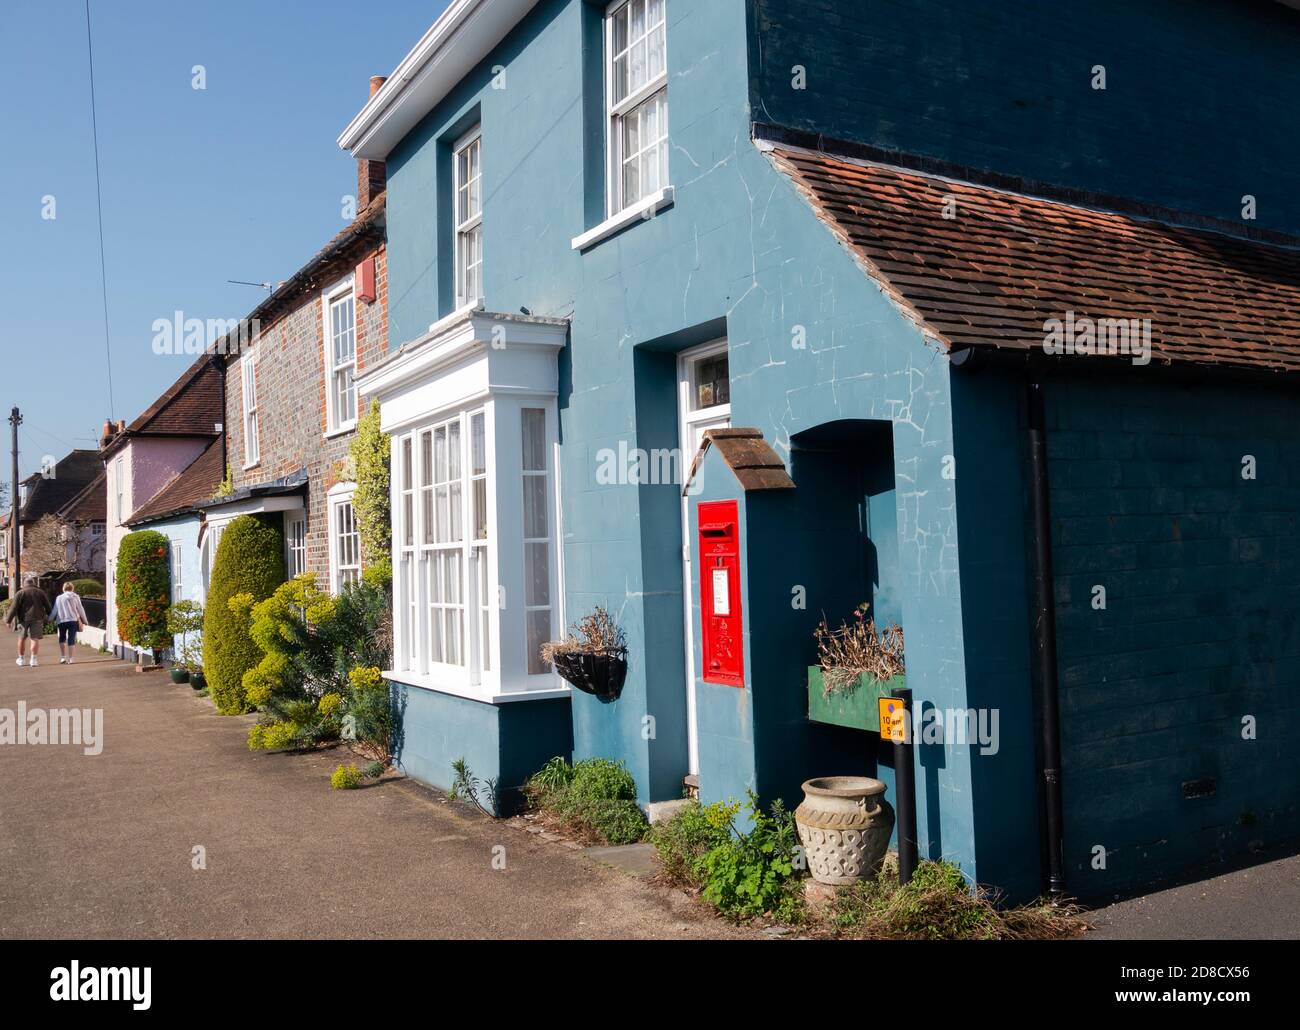 A cottage with a post box built into its external walls, in the village of Portchester, Hampshire, England Stock Photo